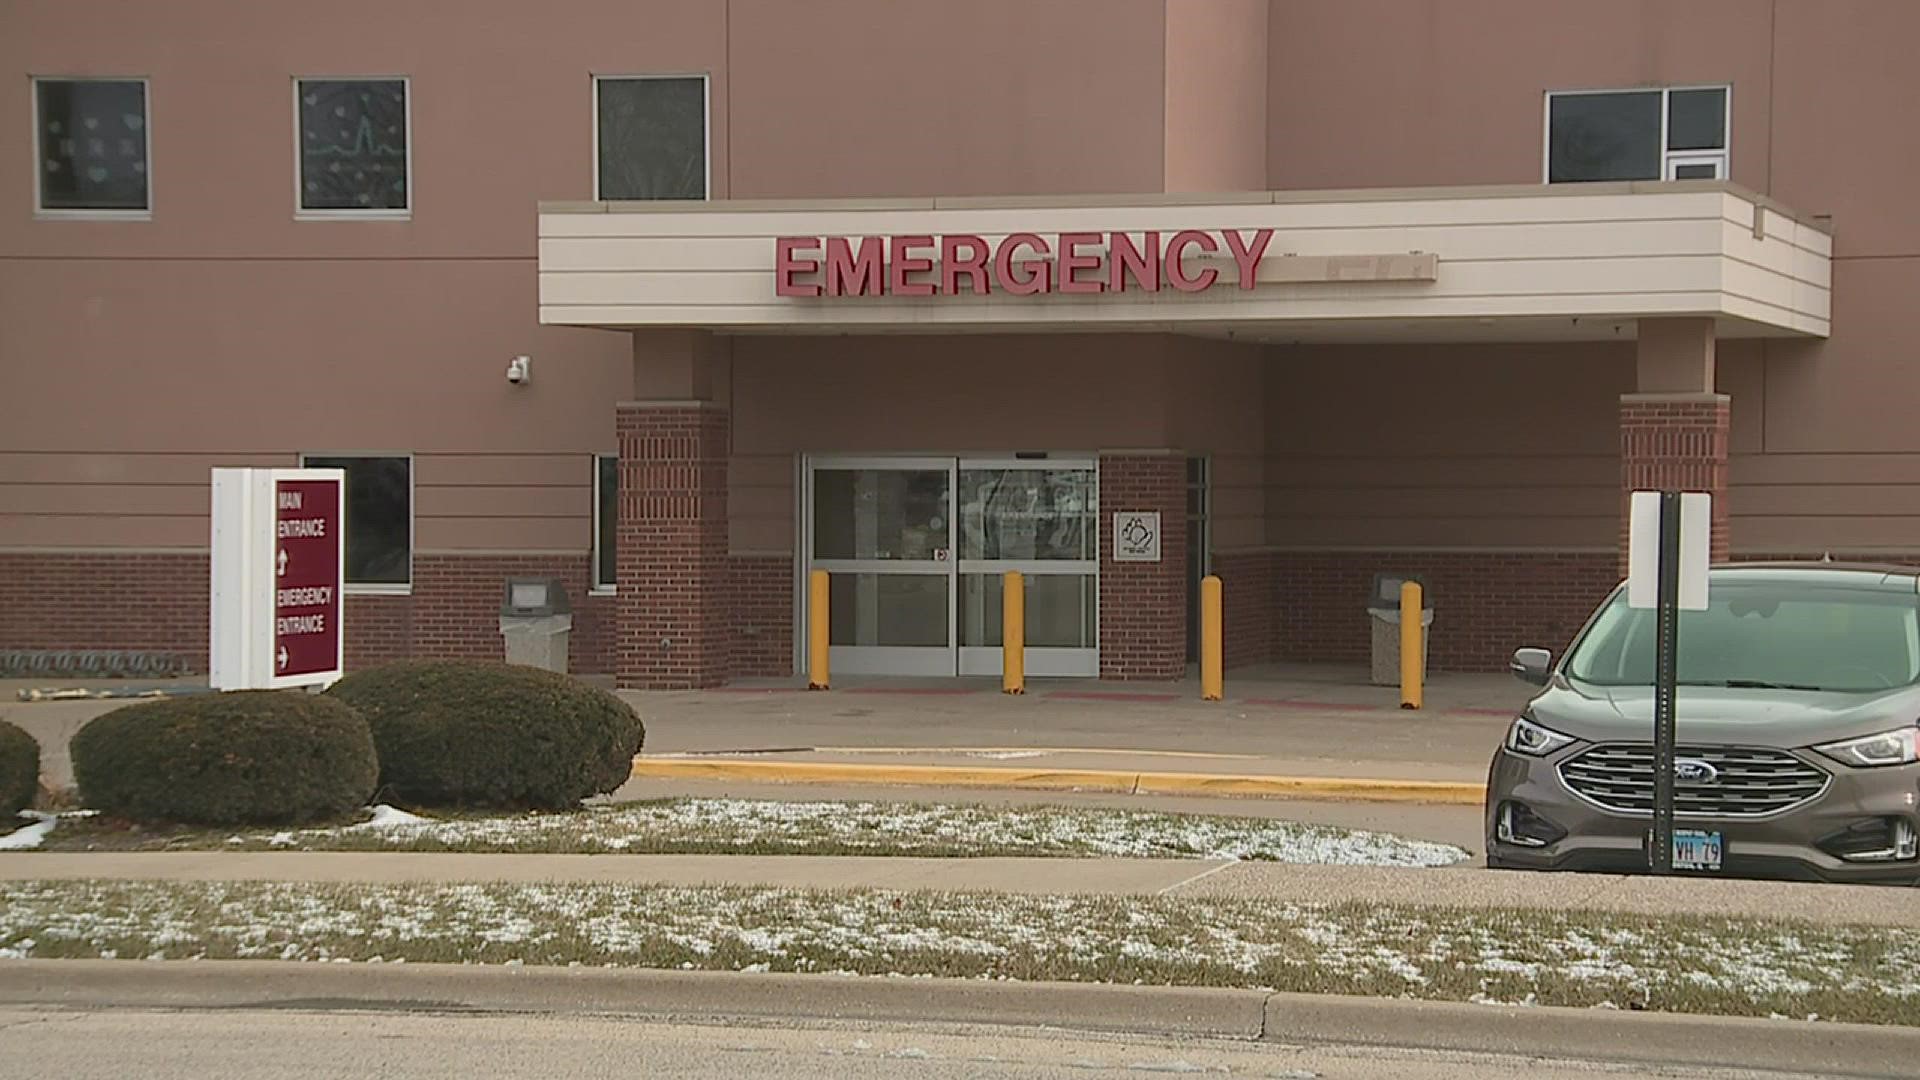 CMS found the hospital to be severely understaffed, saying the situation inside the facility poses a serious risk of injury or death for patients and employees.